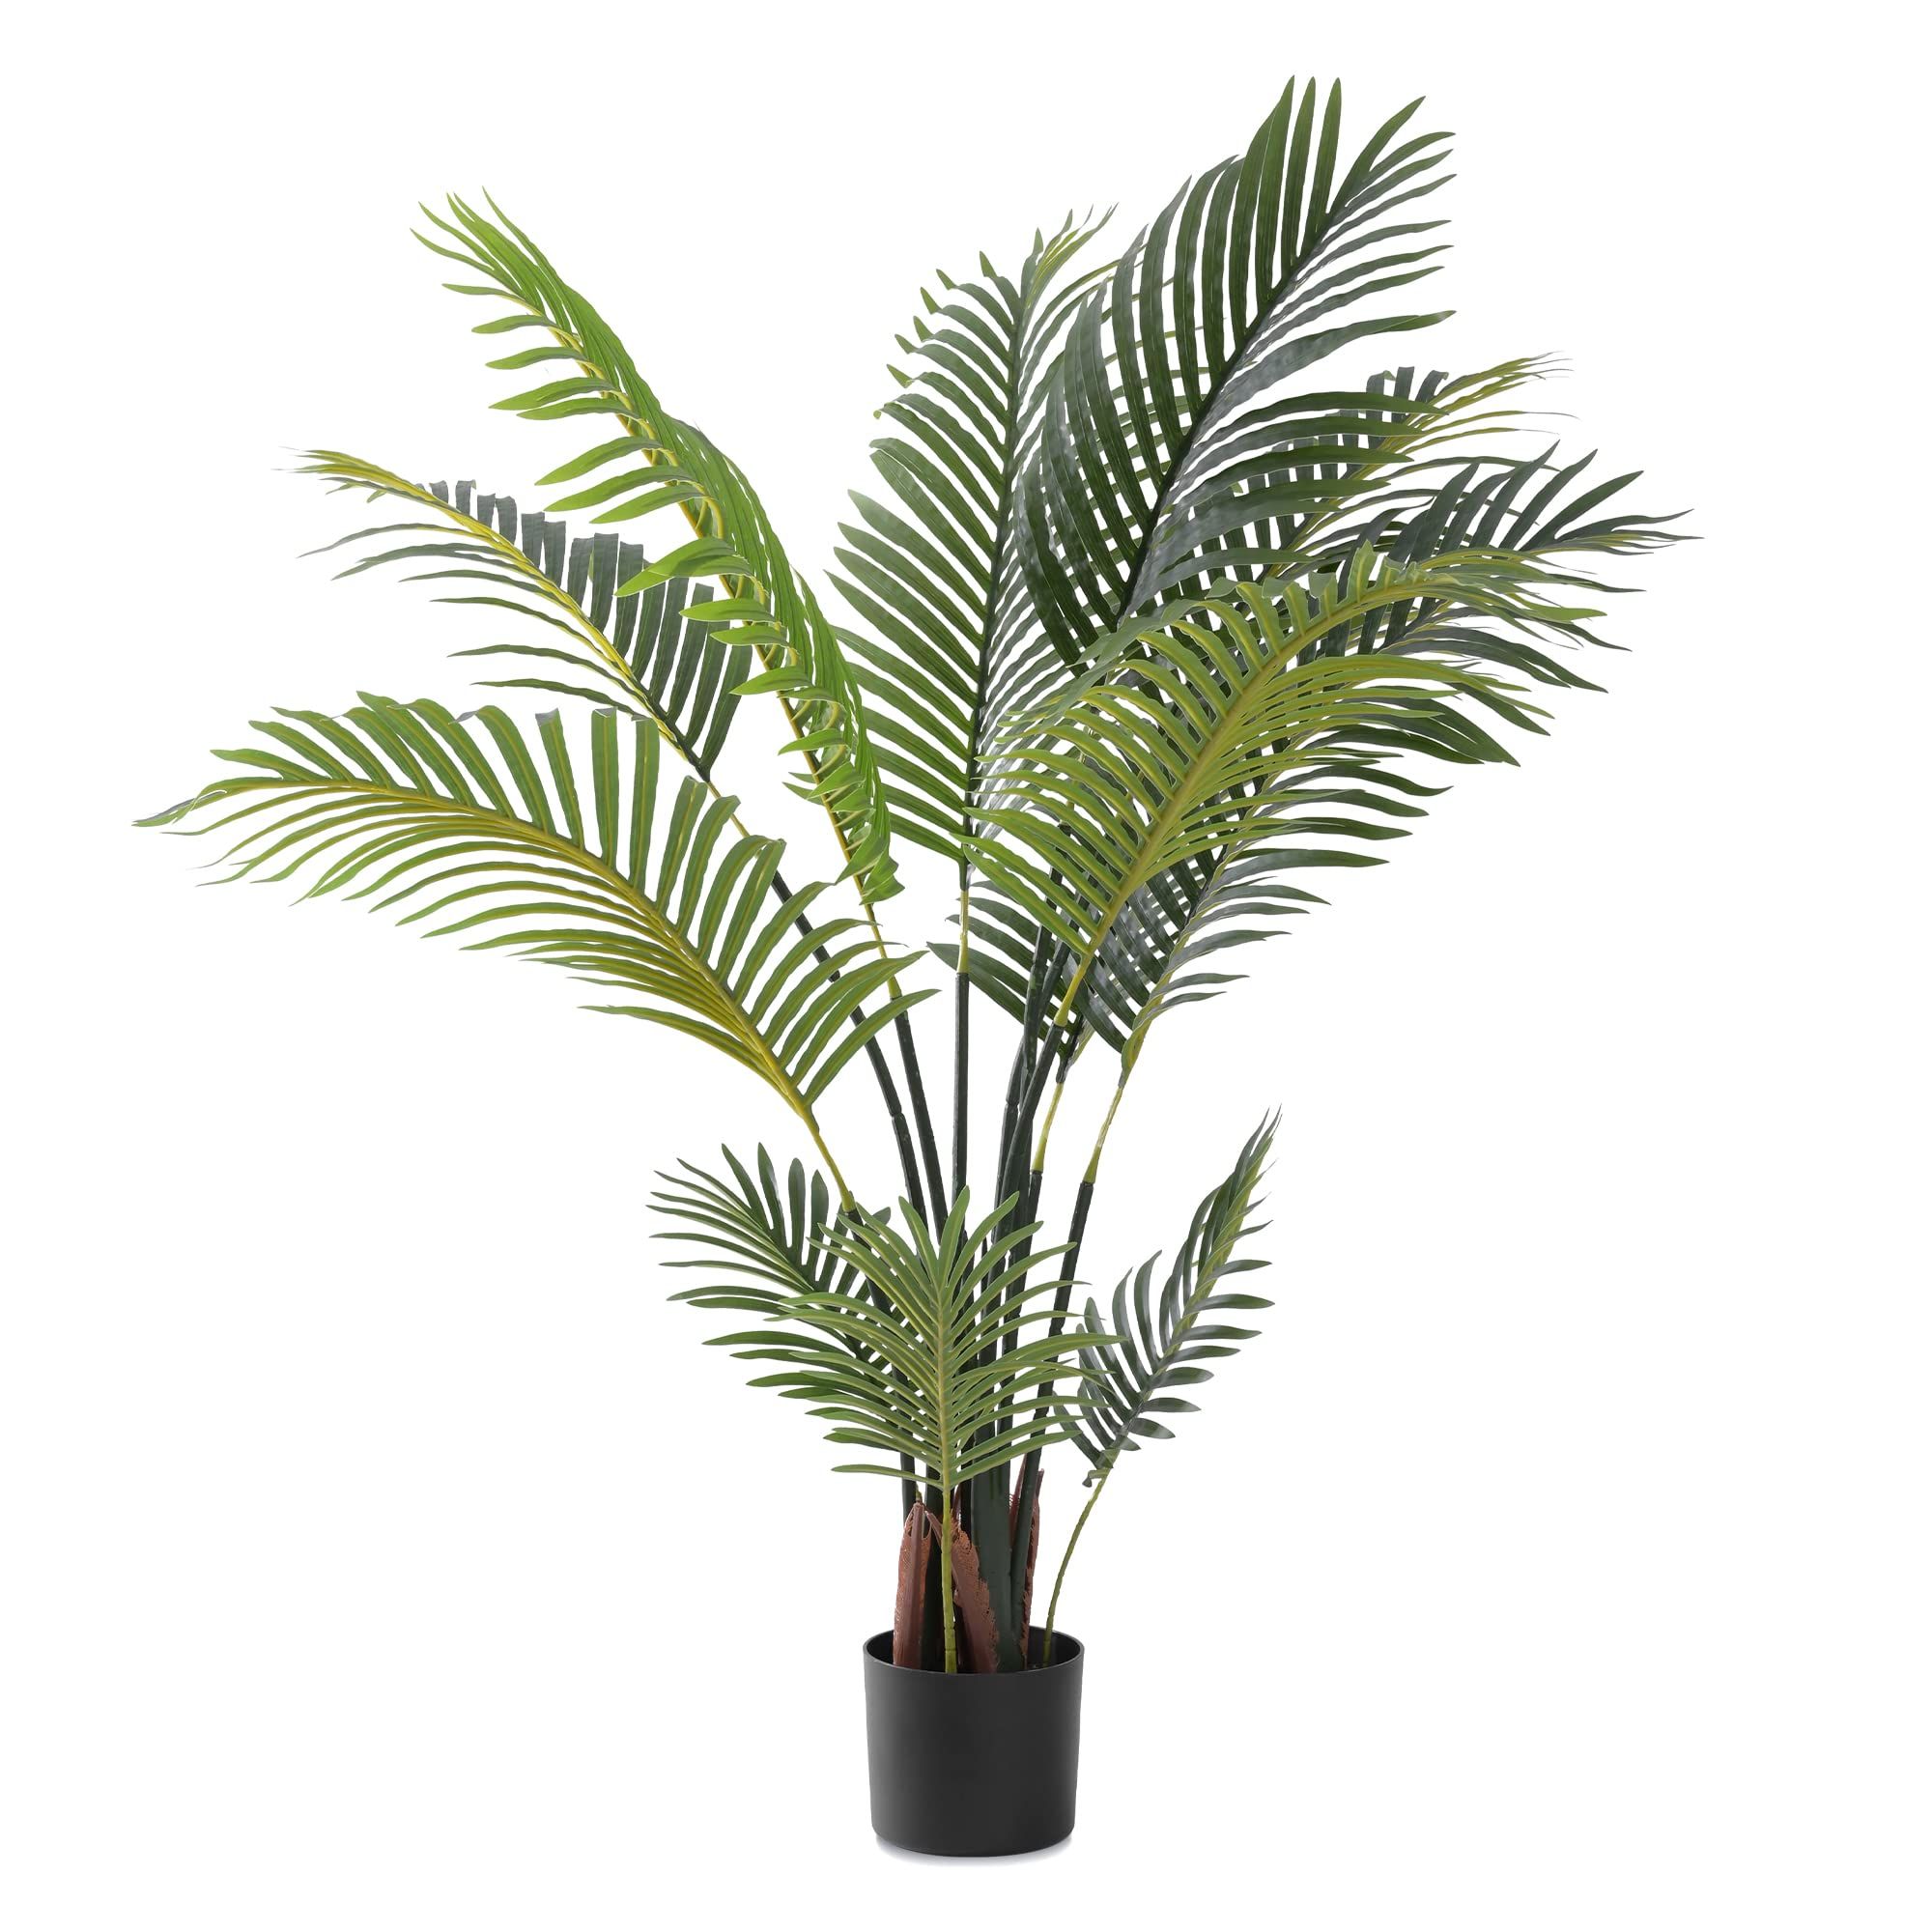 Artificial Tree - Areca Palm Faux Trees Outdoor - Artificial Plants for Home Decor Indoor - 4ft Tropical Decor Areca Palm Tree with 12 Leaves, Home Office, Living Room Decoration, AP120 | Amazon (US)